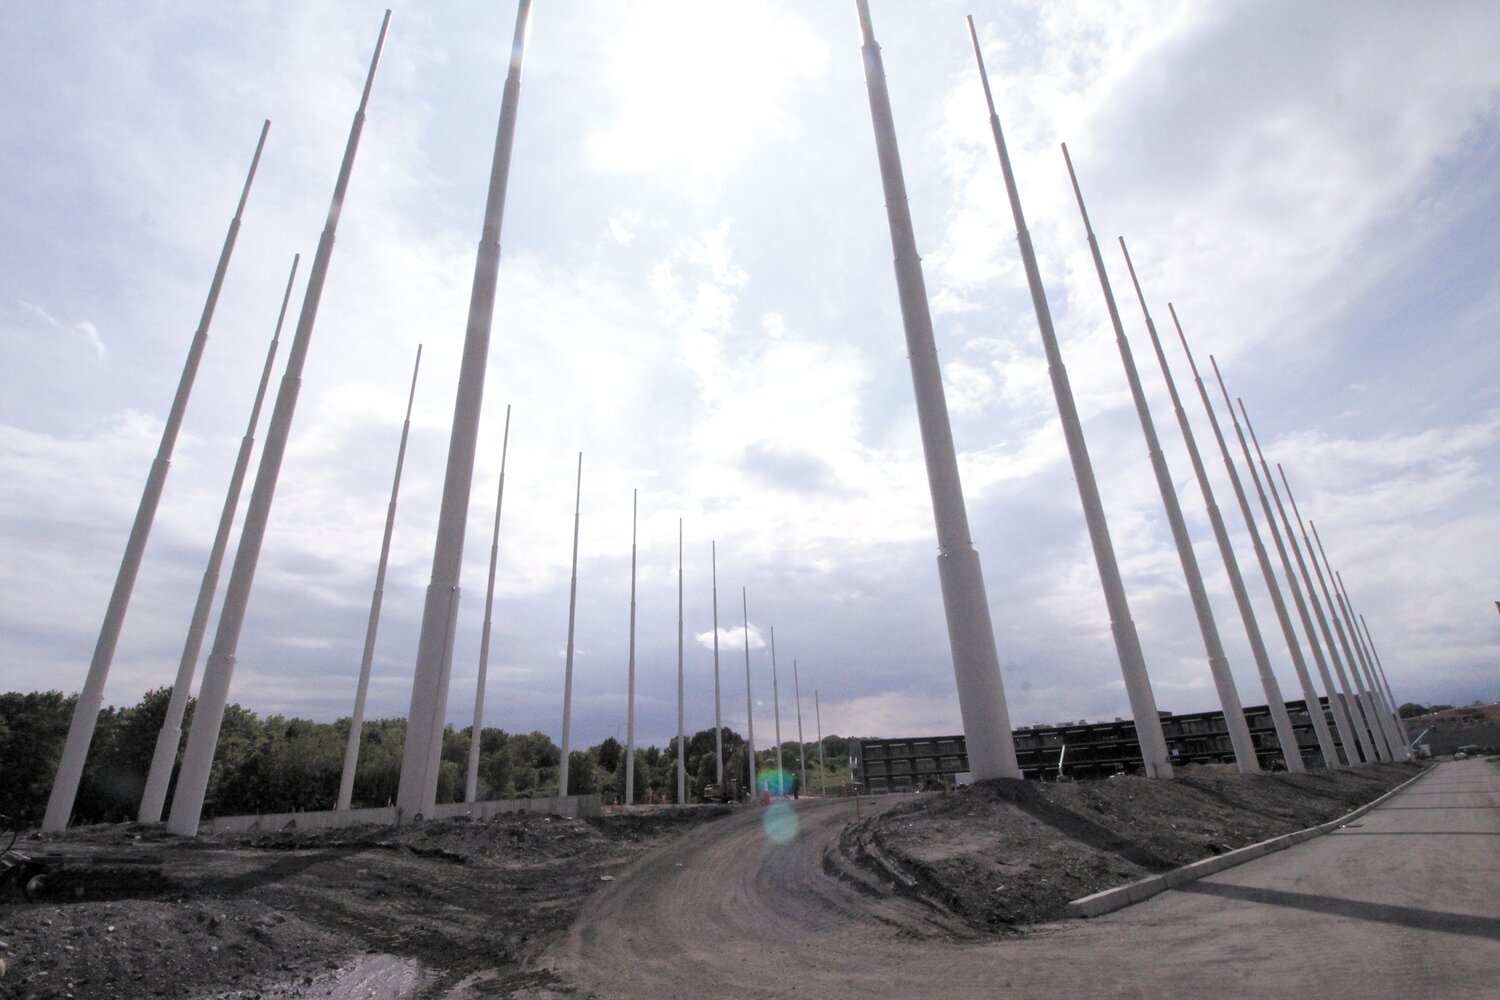 YOU WONT’T BE ABLE TO TOP THAT: Poles that will soon hold netting stretch out from the three-level platform where people will hit balls from the $40 million Top Golf under construction across from Gar den City and bordered by Route 37.